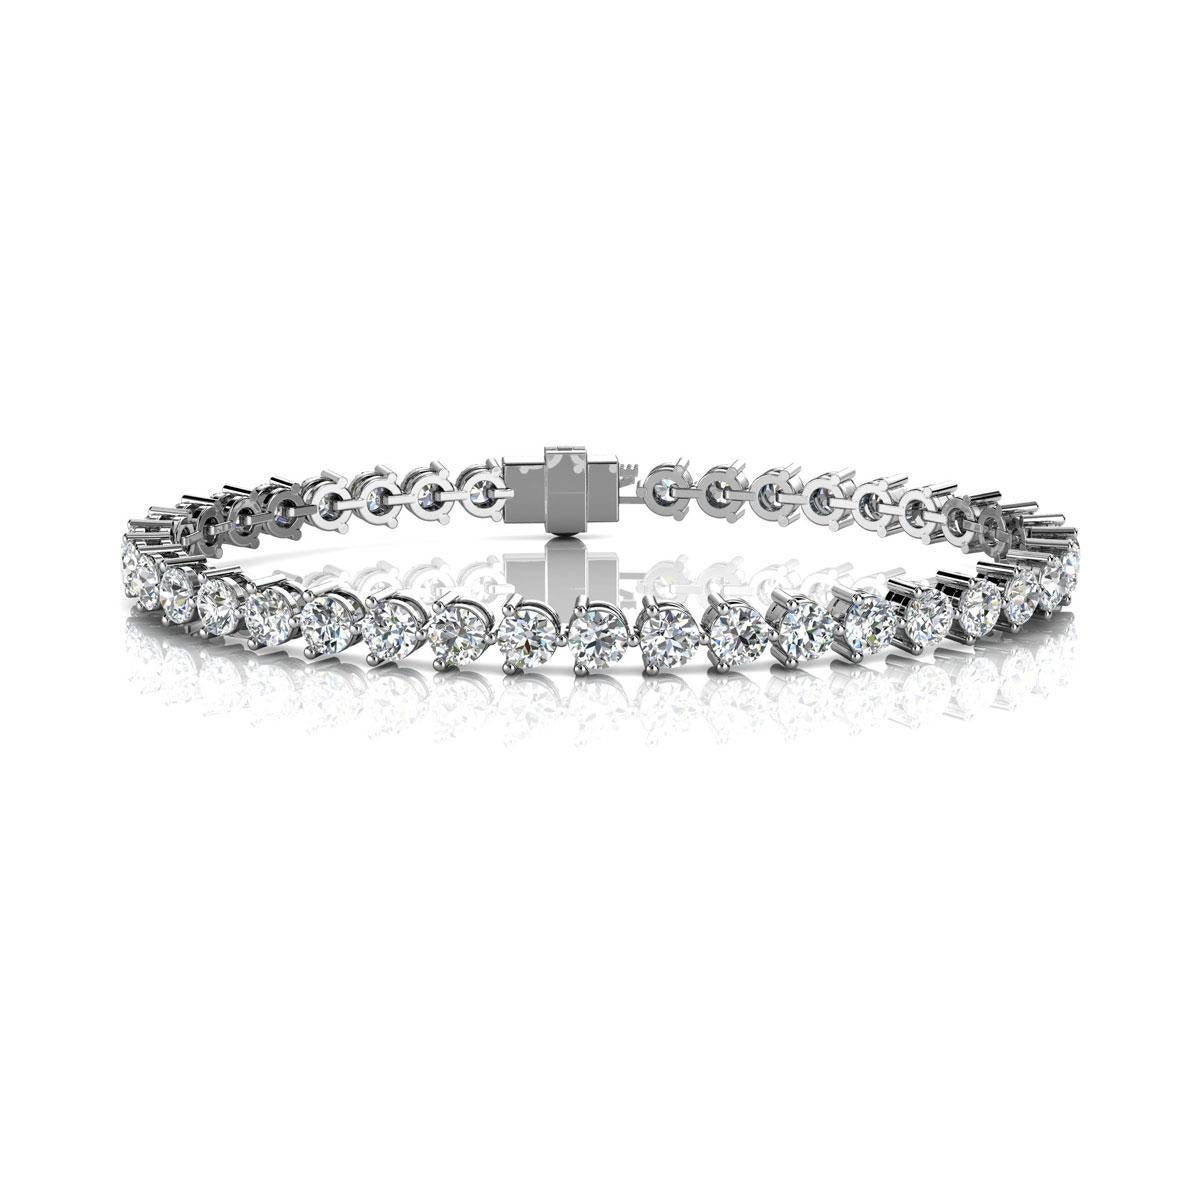 A timeless three prongs diamonds tennis bracelet. Experience the Difference!

Product details: 

Center Gemstone Type: NATURAL DIAMOND
Center Gemstone Color: WHITE
Center Gemstone Shape: ROUND
Center Diamond Carat Weight: 7
Metal: Platinum
Metal